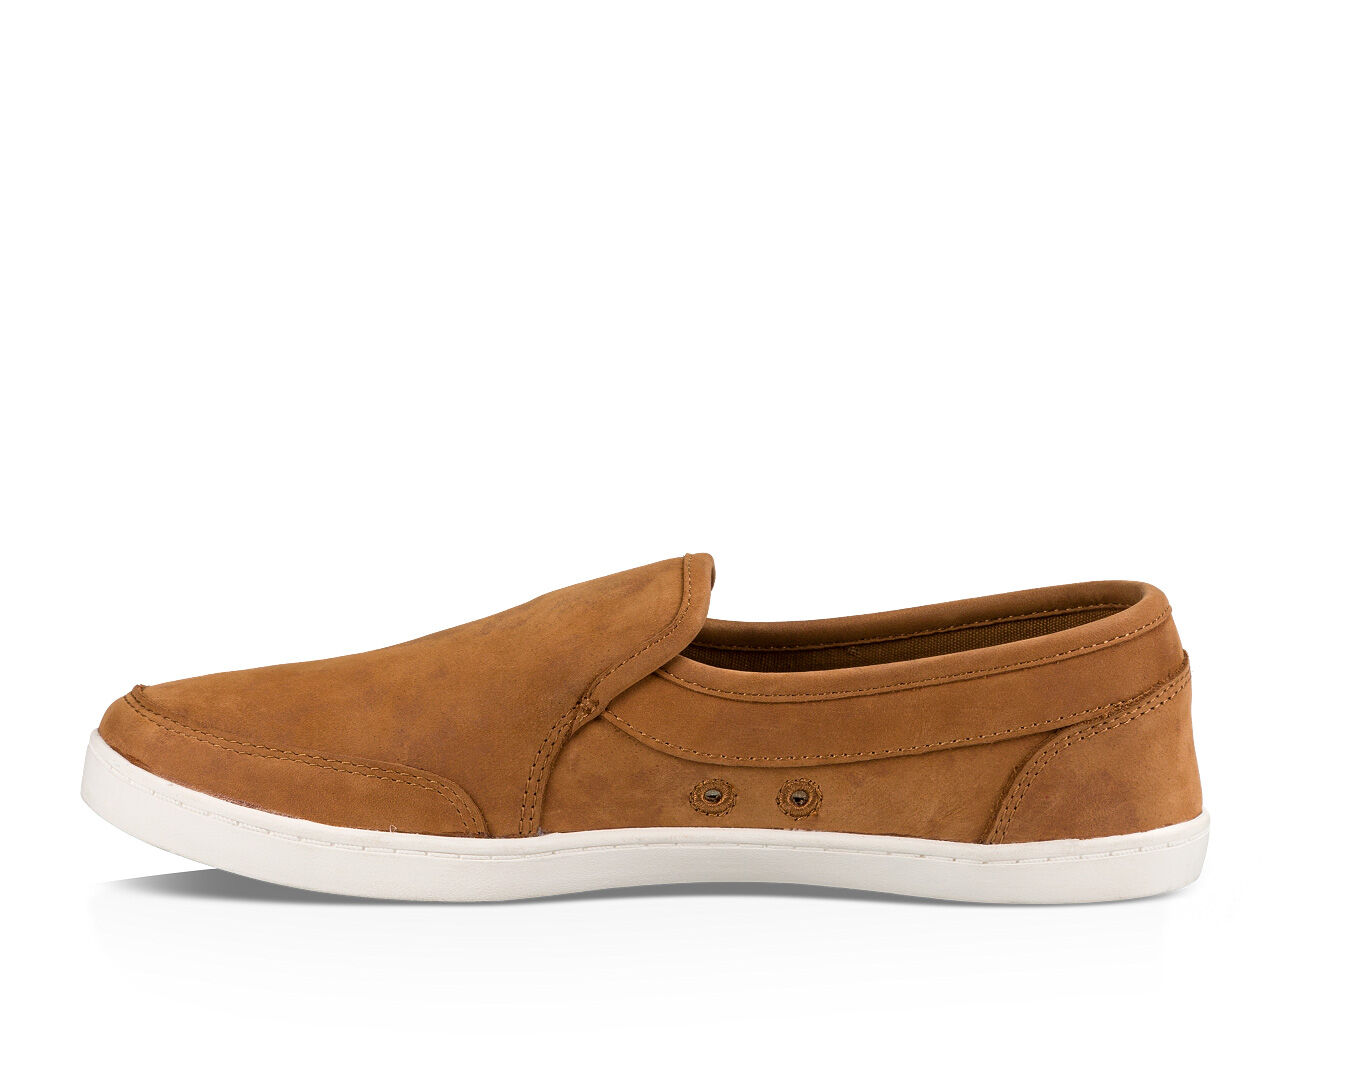 Pair O Dice Leather Slip-on Sneakers 